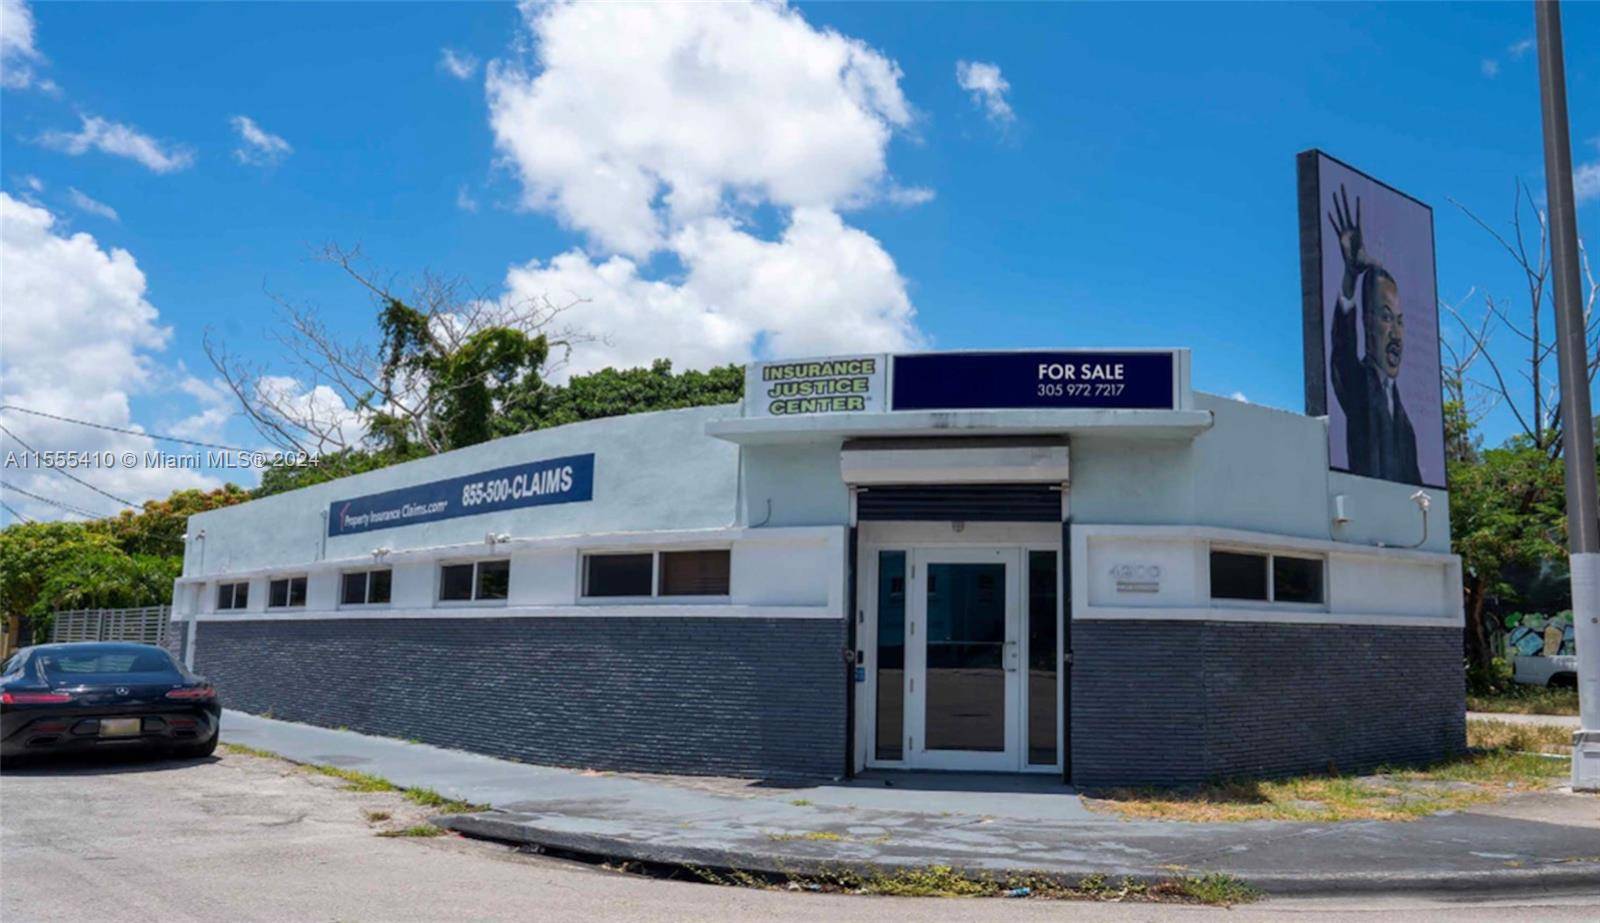 Opportunity to purchase a fully built out and renovated office building 5 minutes from the Miami Design District and Wynwood.